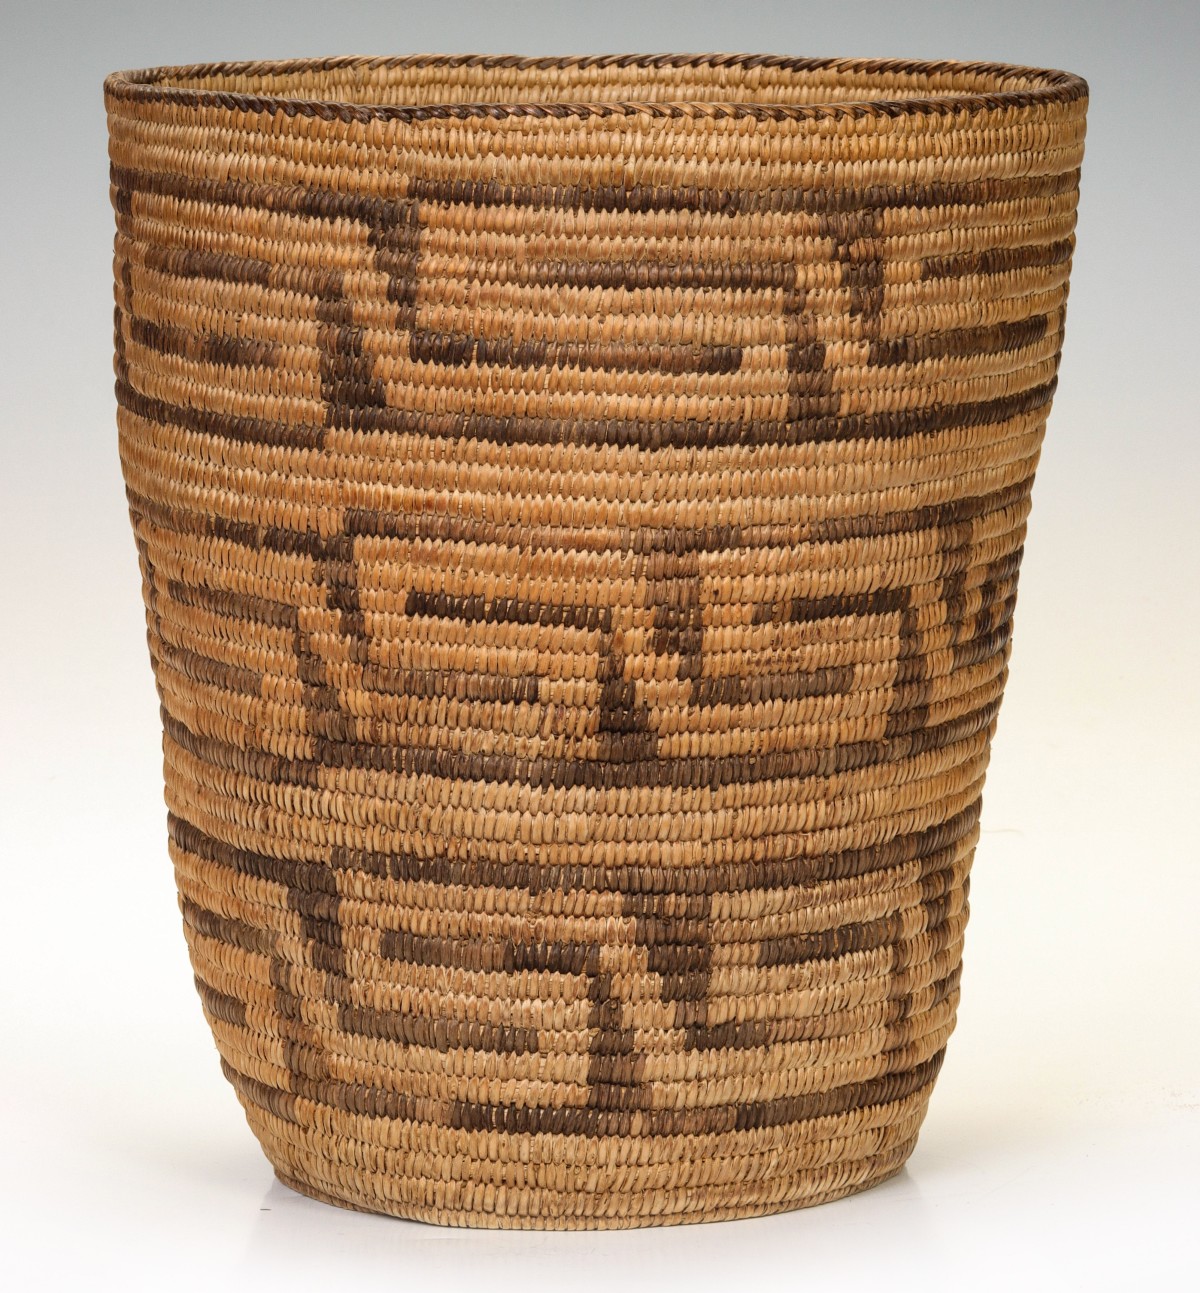 A TALL PIMA BASKETRY CONTAINER WITH KEY PATTERN C. 1900